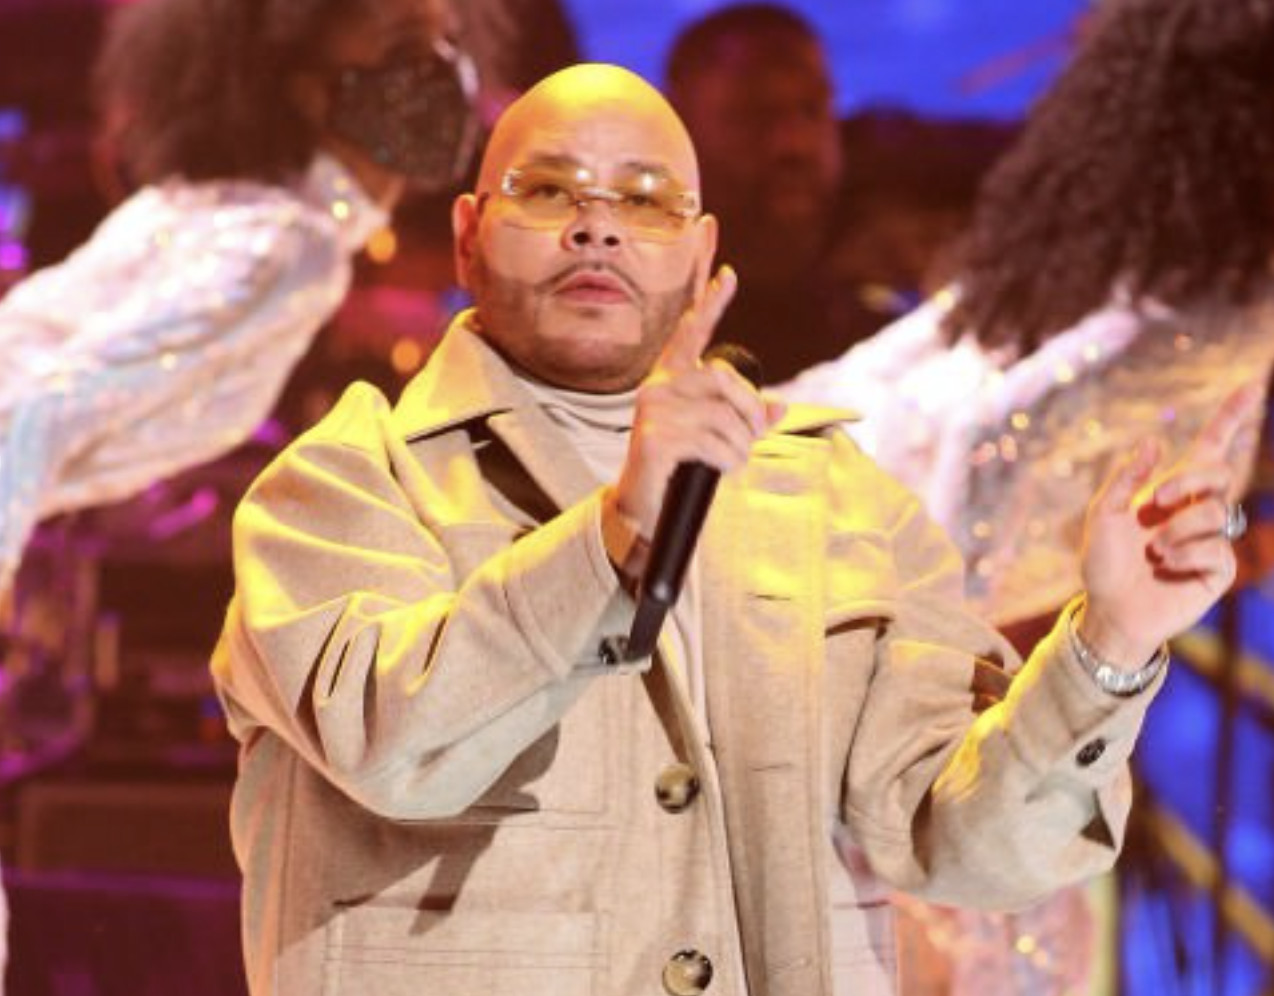 Fat Joe & Big Pun Were Saved By Mike Tyson Before Being Beat Up By Bouncers